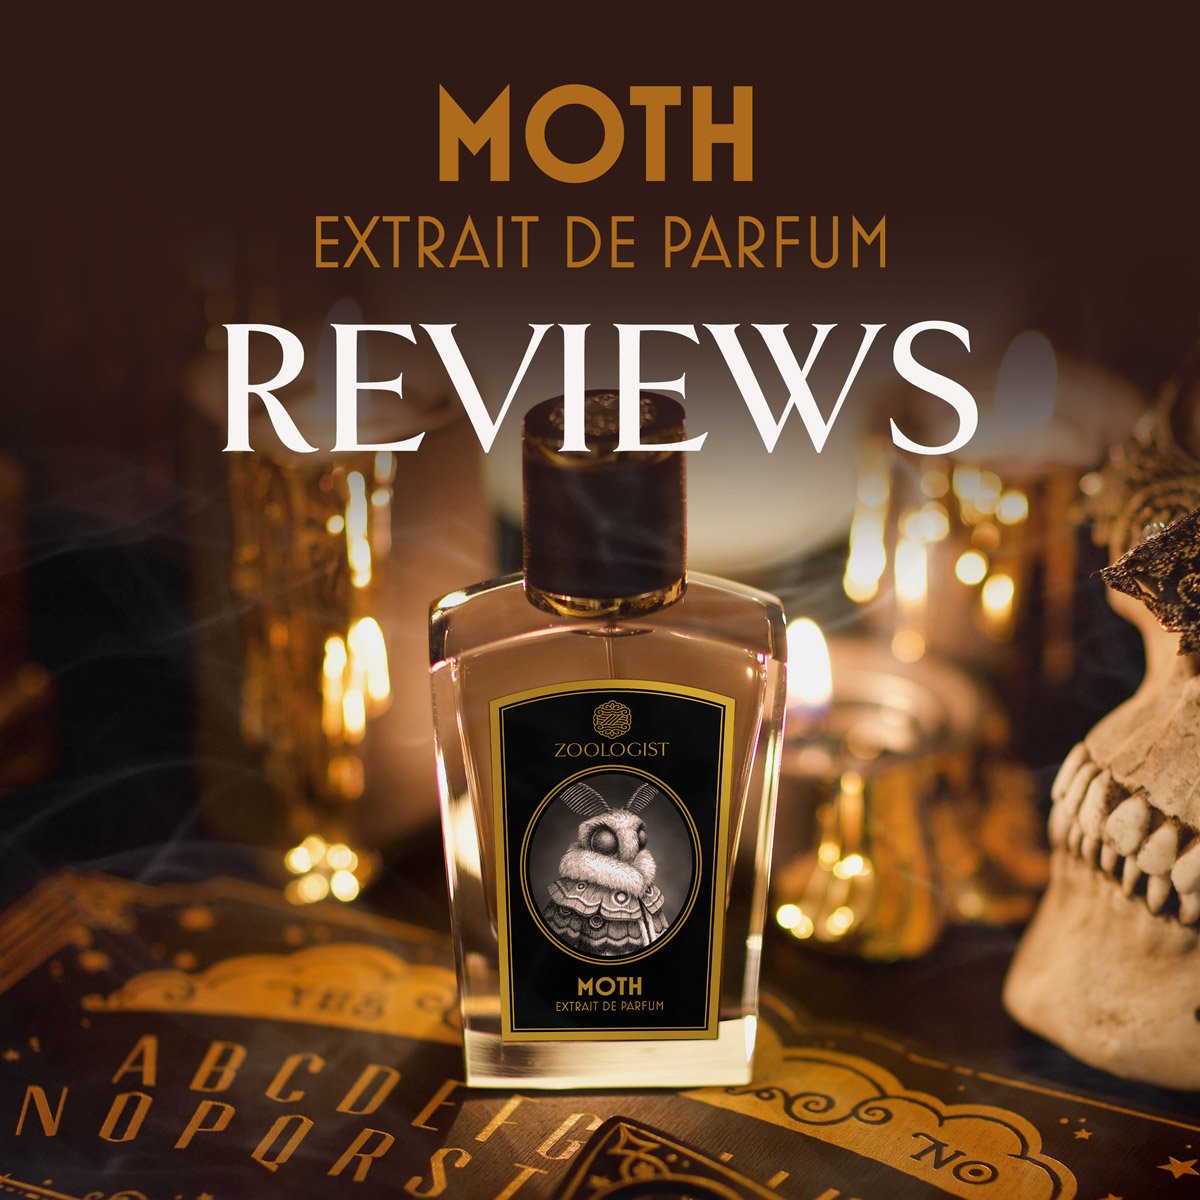 Zoologist Moth Reviews Roundup